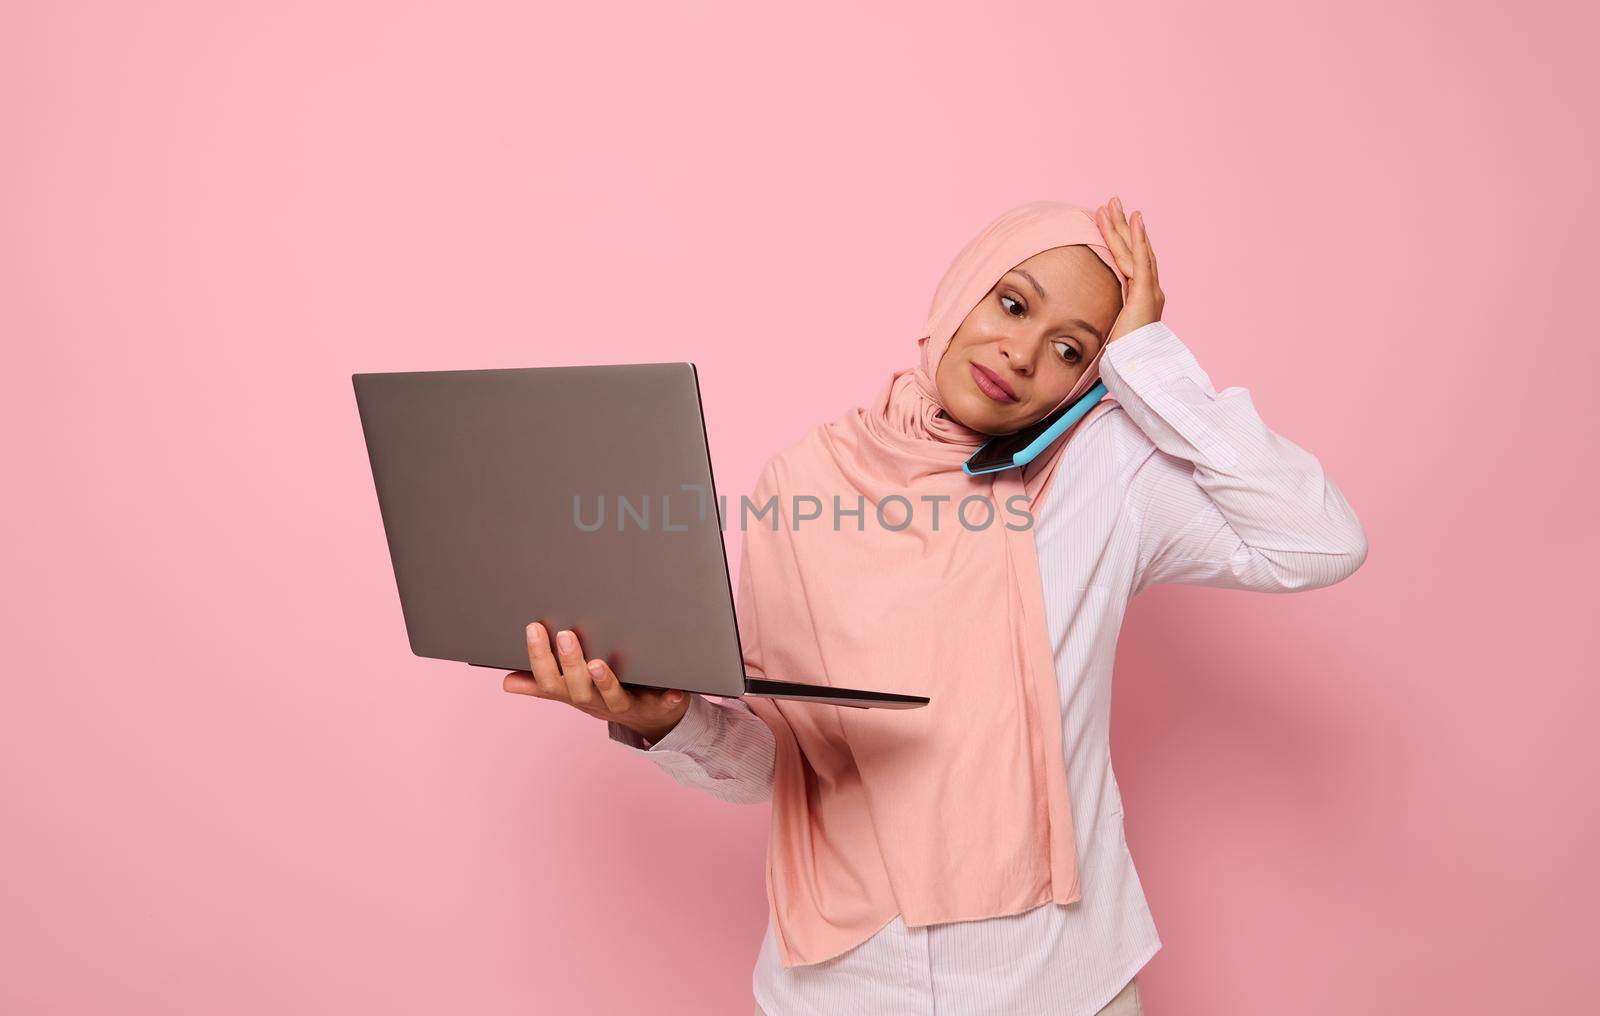 Portrait of puzzled Muslim Arab woman in pink hijab, with laptop, talking on the phone, holding her head because of multitasking, looking down with sad expression, on colored background copy space